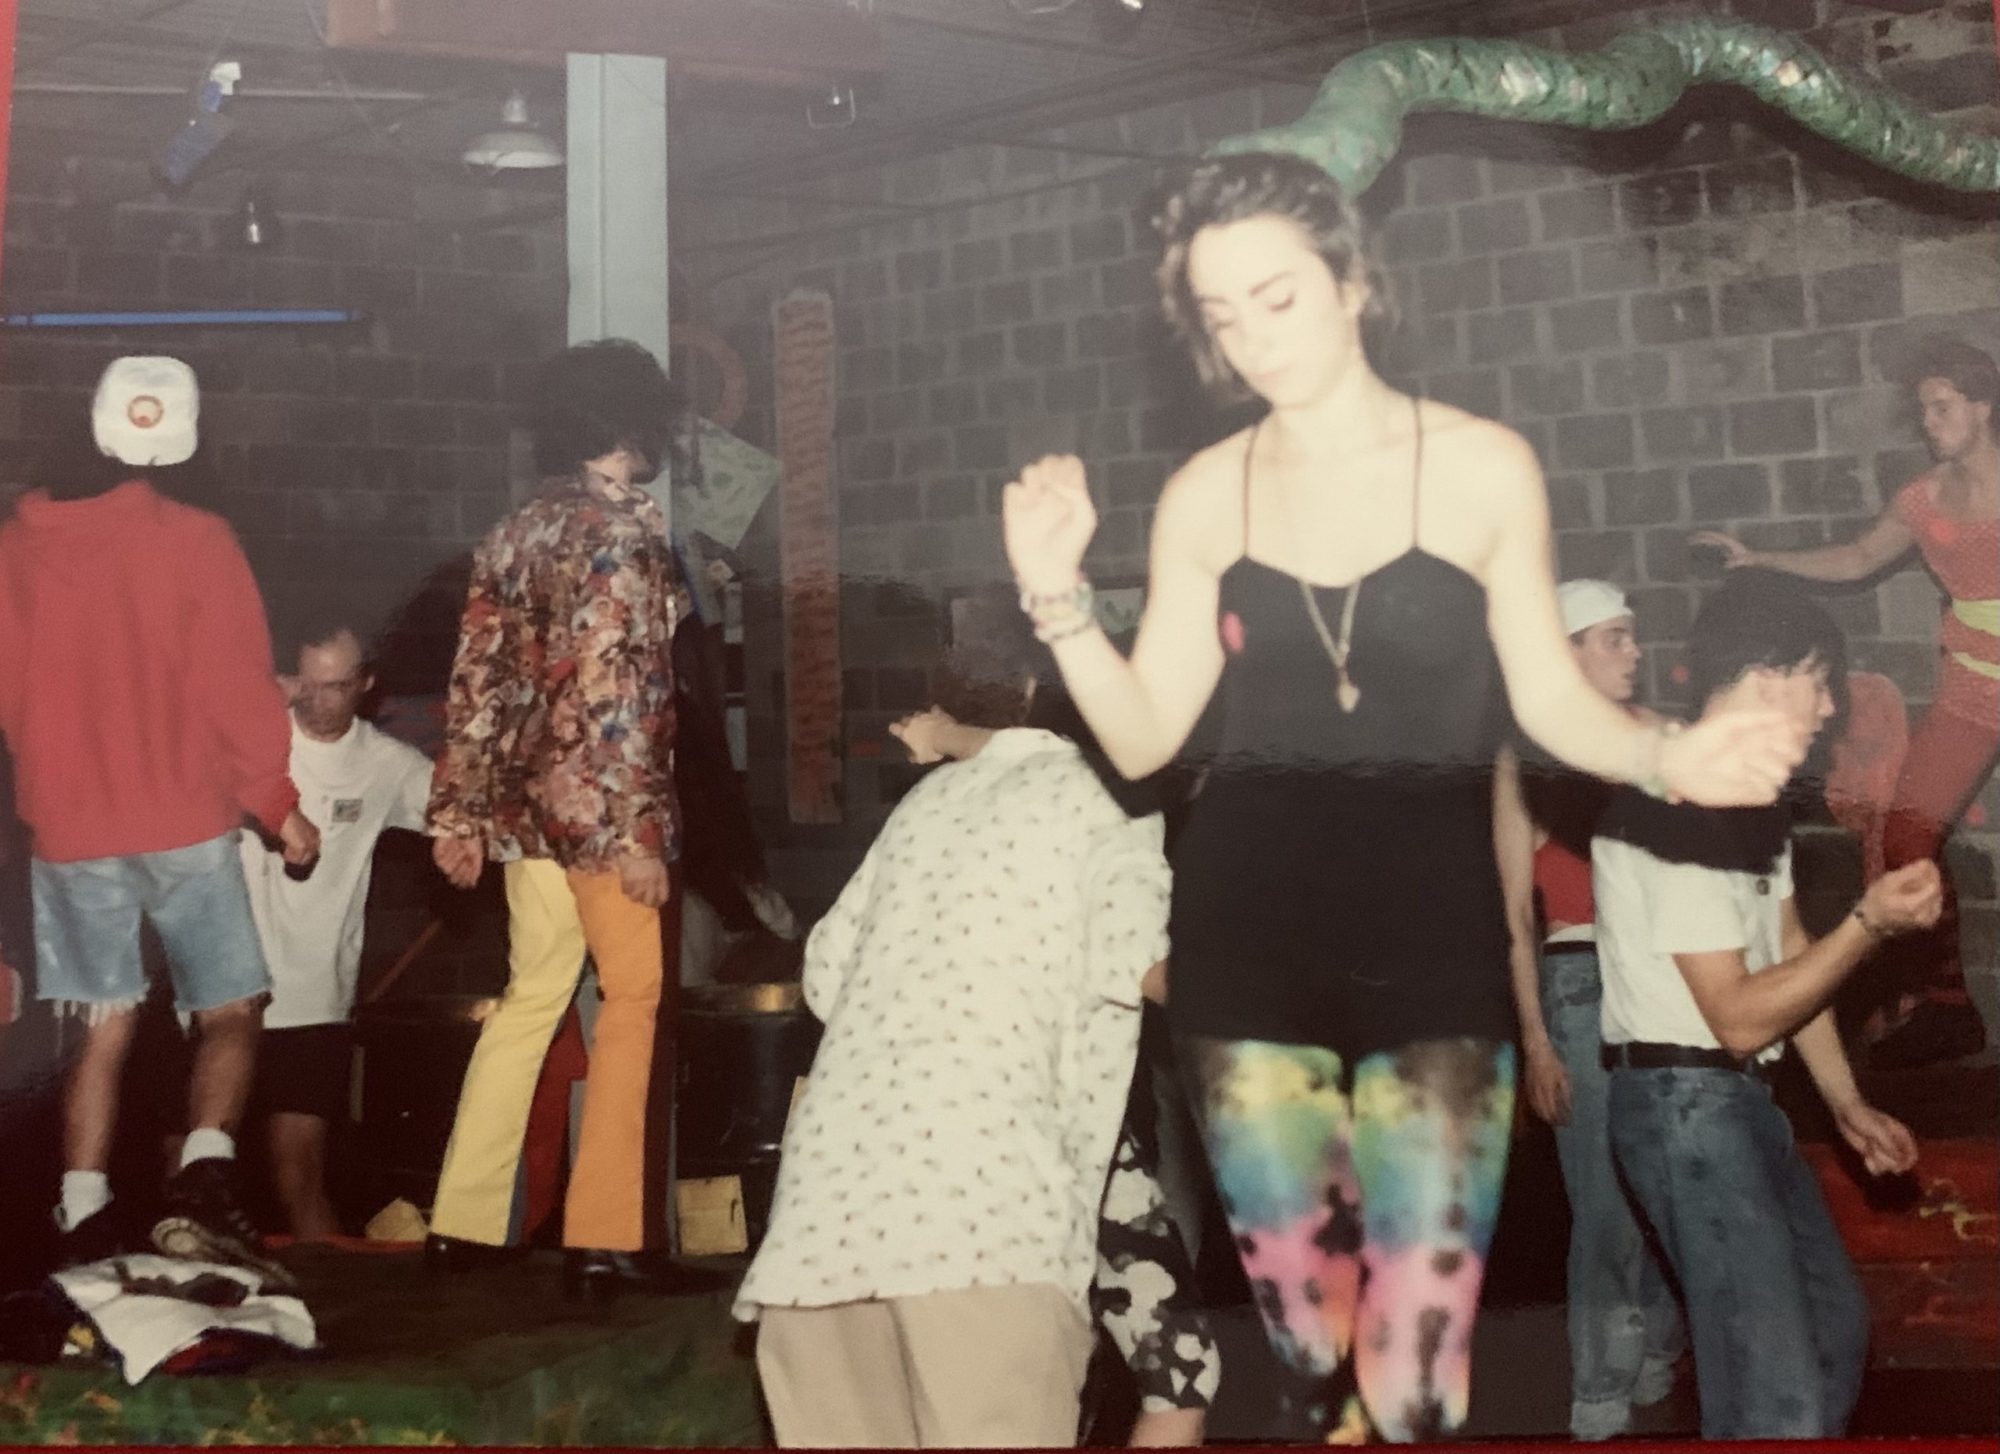 A photograph of individuals in a room with a brick wall. The centermost individual is wearing a black tank top, colorful pants and a fake snake on their head. Nobody is looking at the camera.